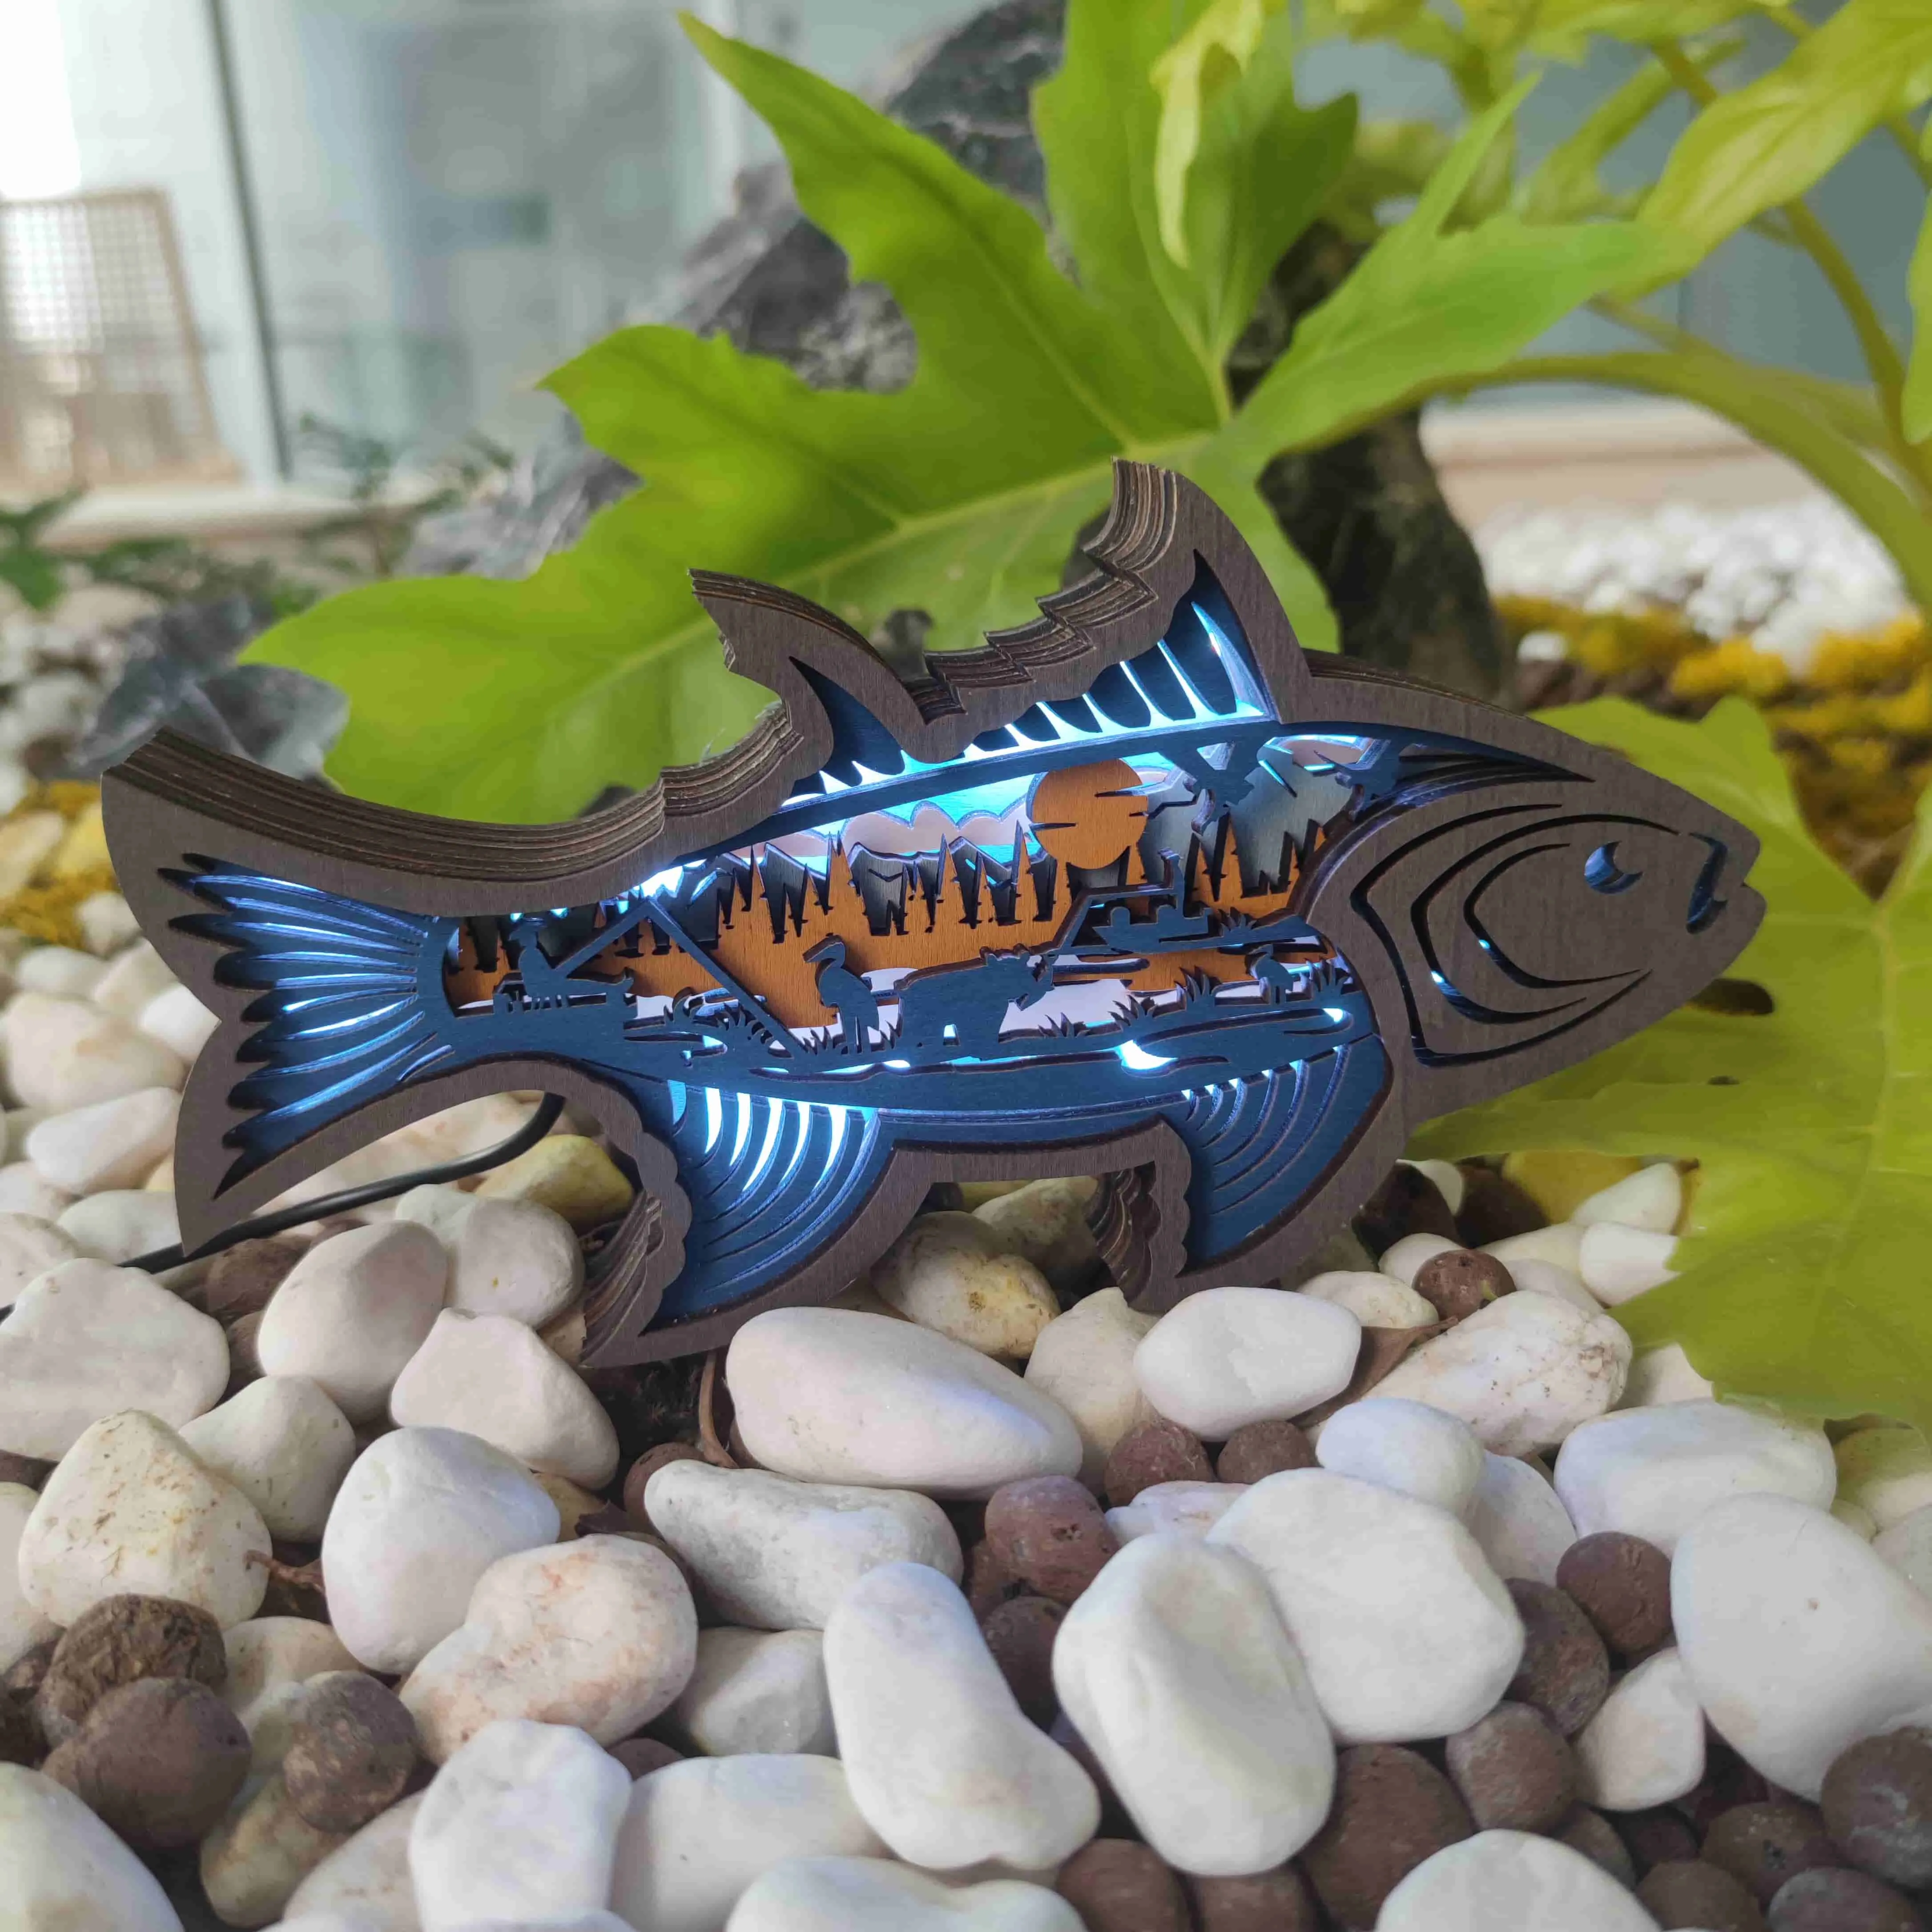 Fish Wooden Night Light, Adorable Interior Decoration, Gift for Fishing Lovers